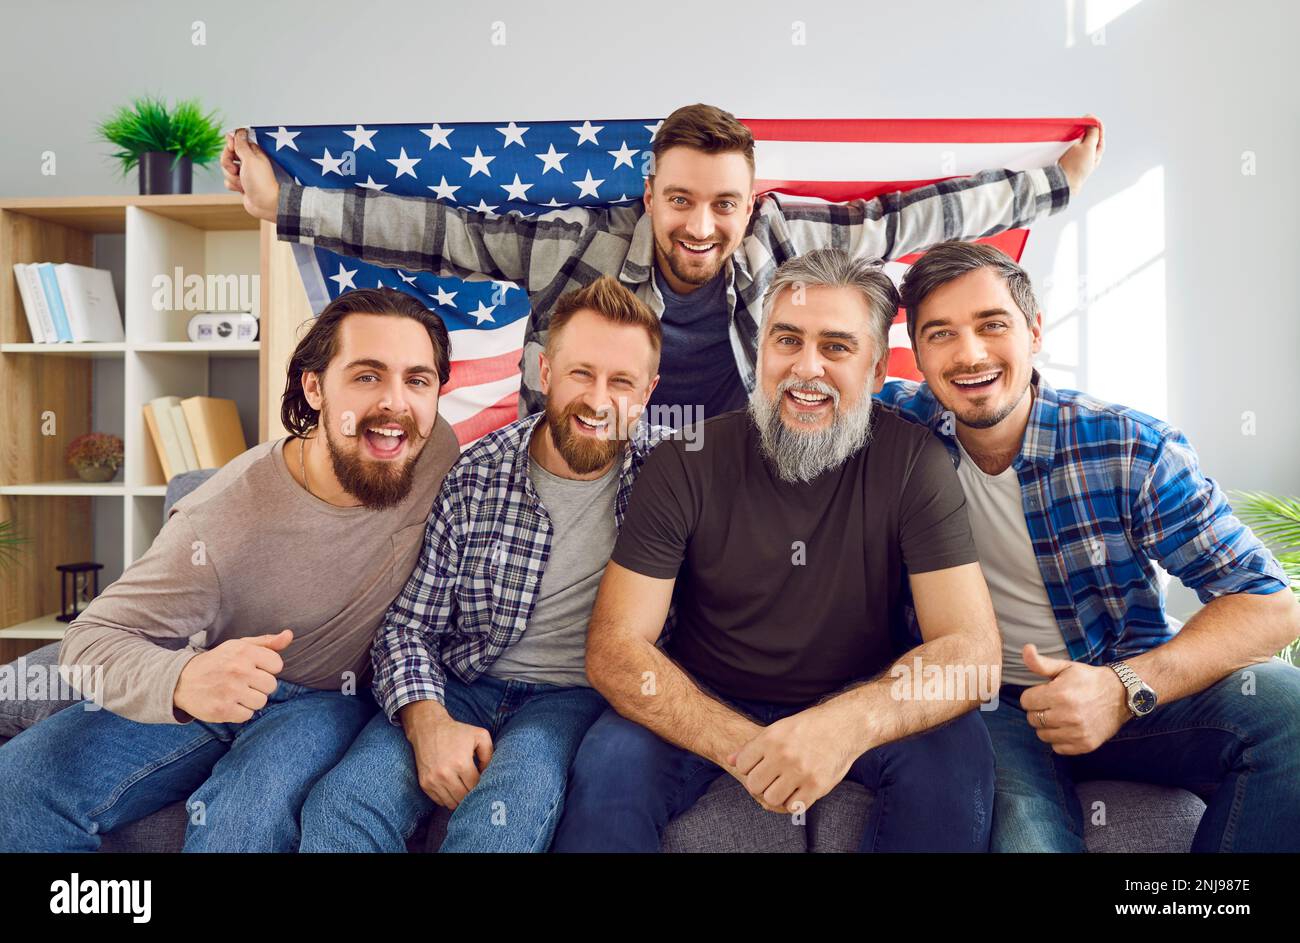 Group of men with American flag sitting on couch and watching soccer match on TV Stock Photo